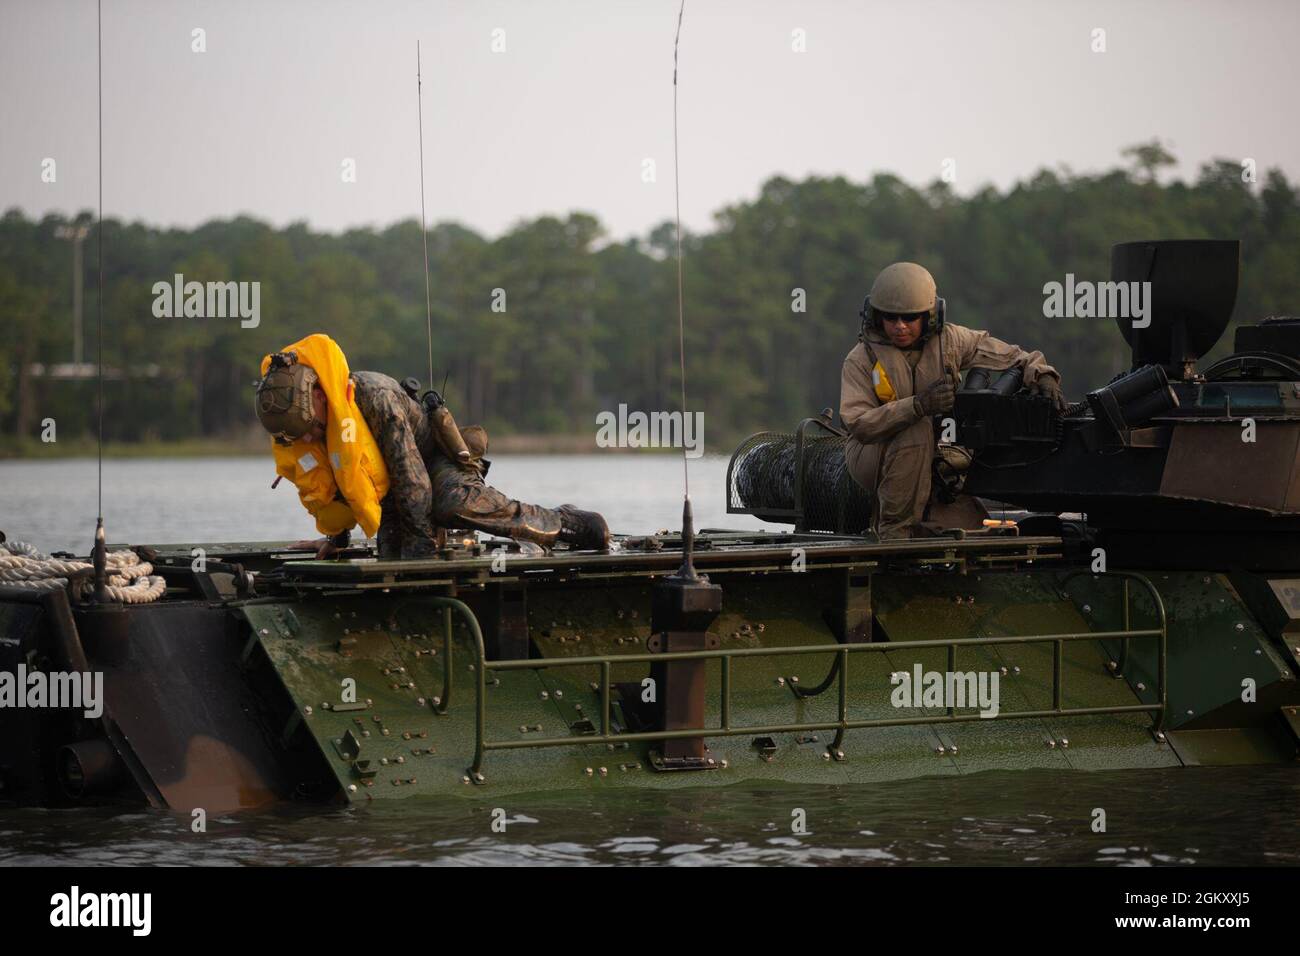 U.S. Marines with 1st Battalion, 2d Marine Regiment, (1/2) 2d Marine Division (MARDIV), and 2d Assault Amphibious Battalion (AABn.), 2d MARDIV participate in a mechanized amphibious egress exercise on Camp Lejeune, N.C., July 22, 2021. The exercise improves how 1/2 integrates with 2d Assault Amphibious Battalion and prepares the unit for future conflict by strengthening its naval expeditionary capabilities. Stock Photo